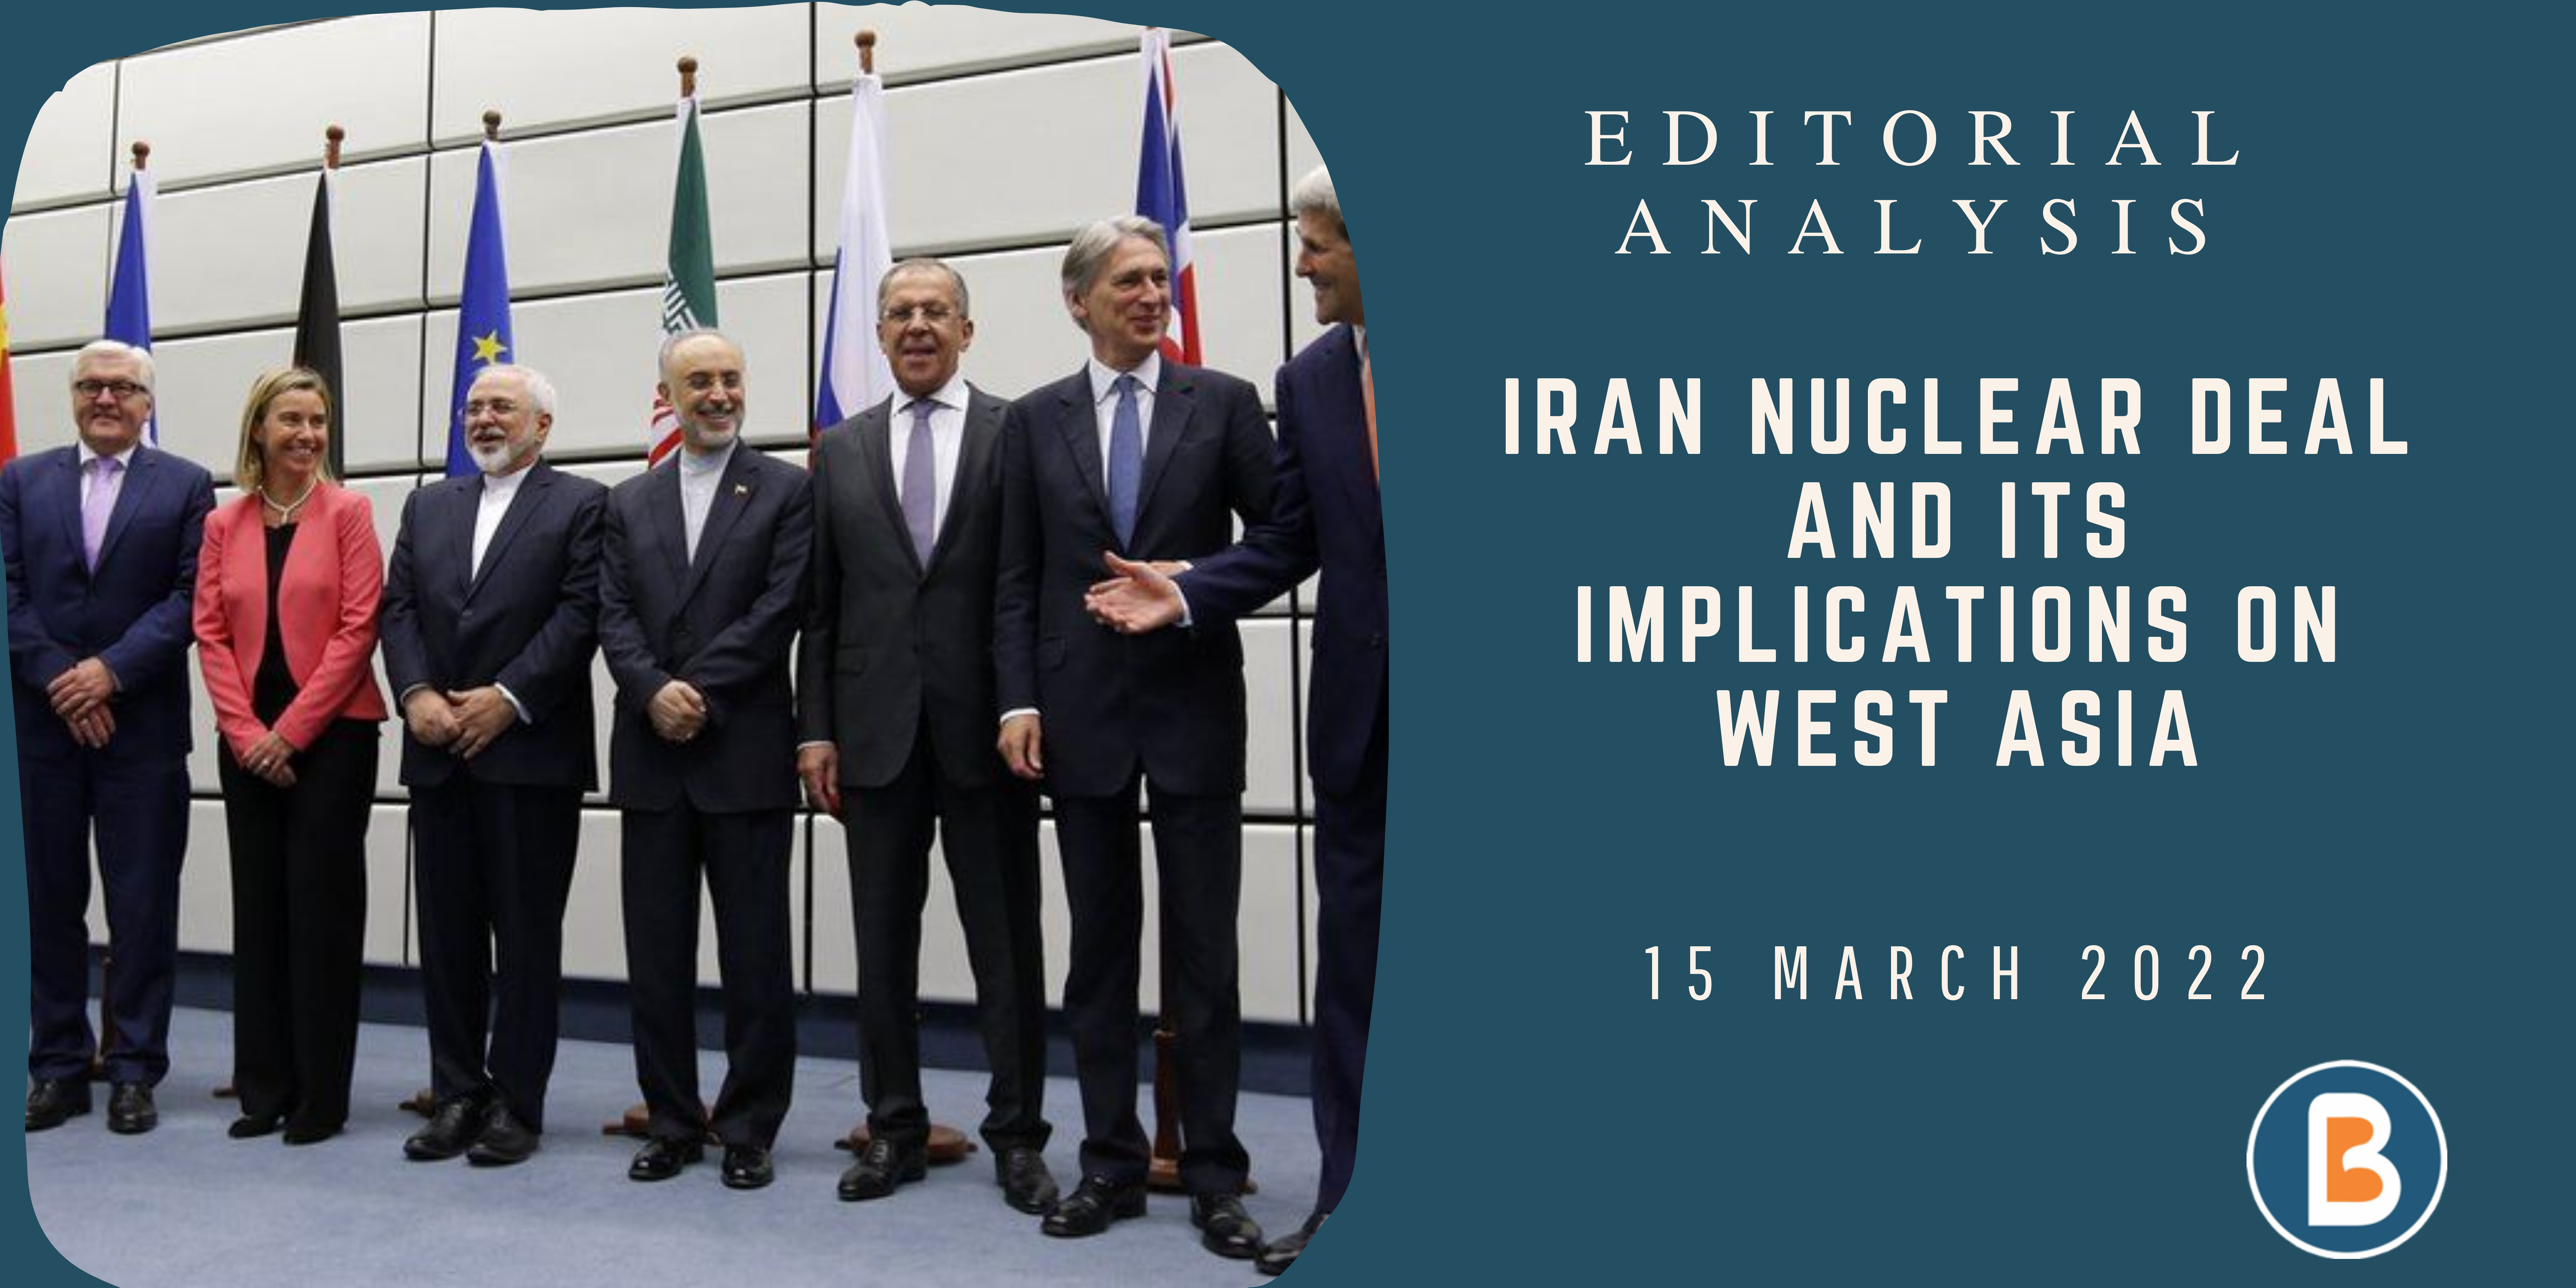 Editorial Analysis for UPSC - Iran Nuclear Deal and Its Implications on West Asia